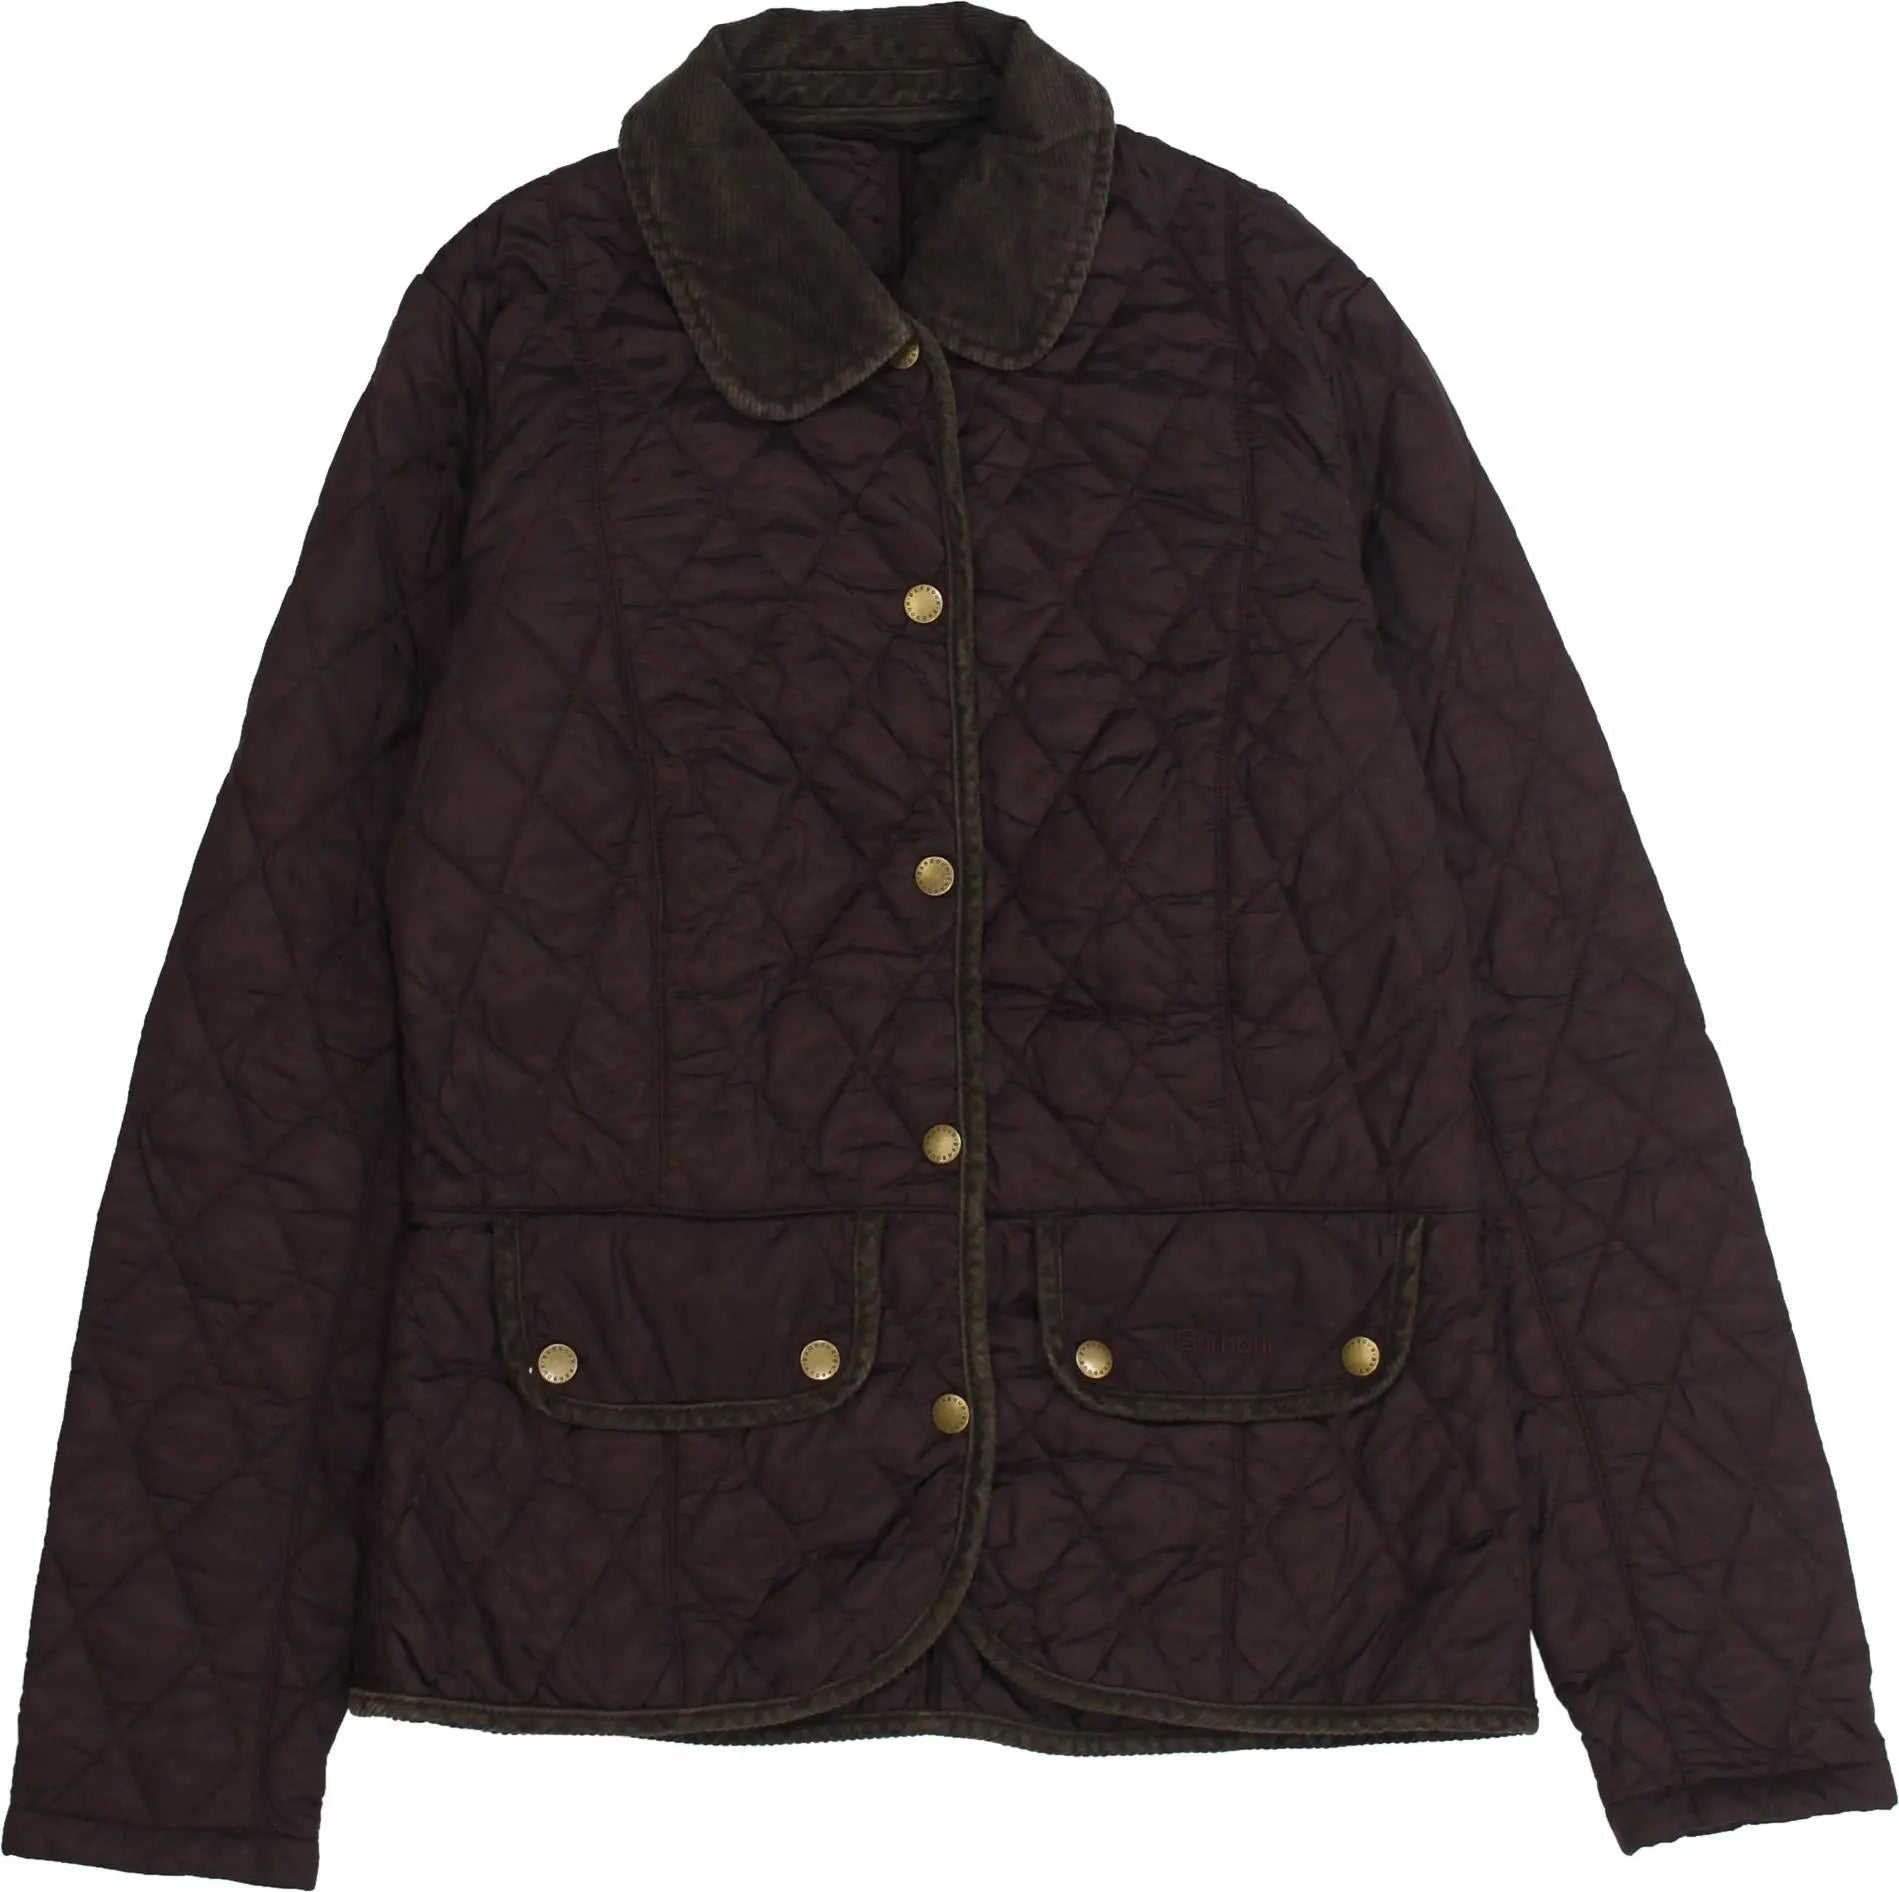 Barbour - Quilted Jacket by Barbour- ThriftTale.com - Vintage and second handclothing